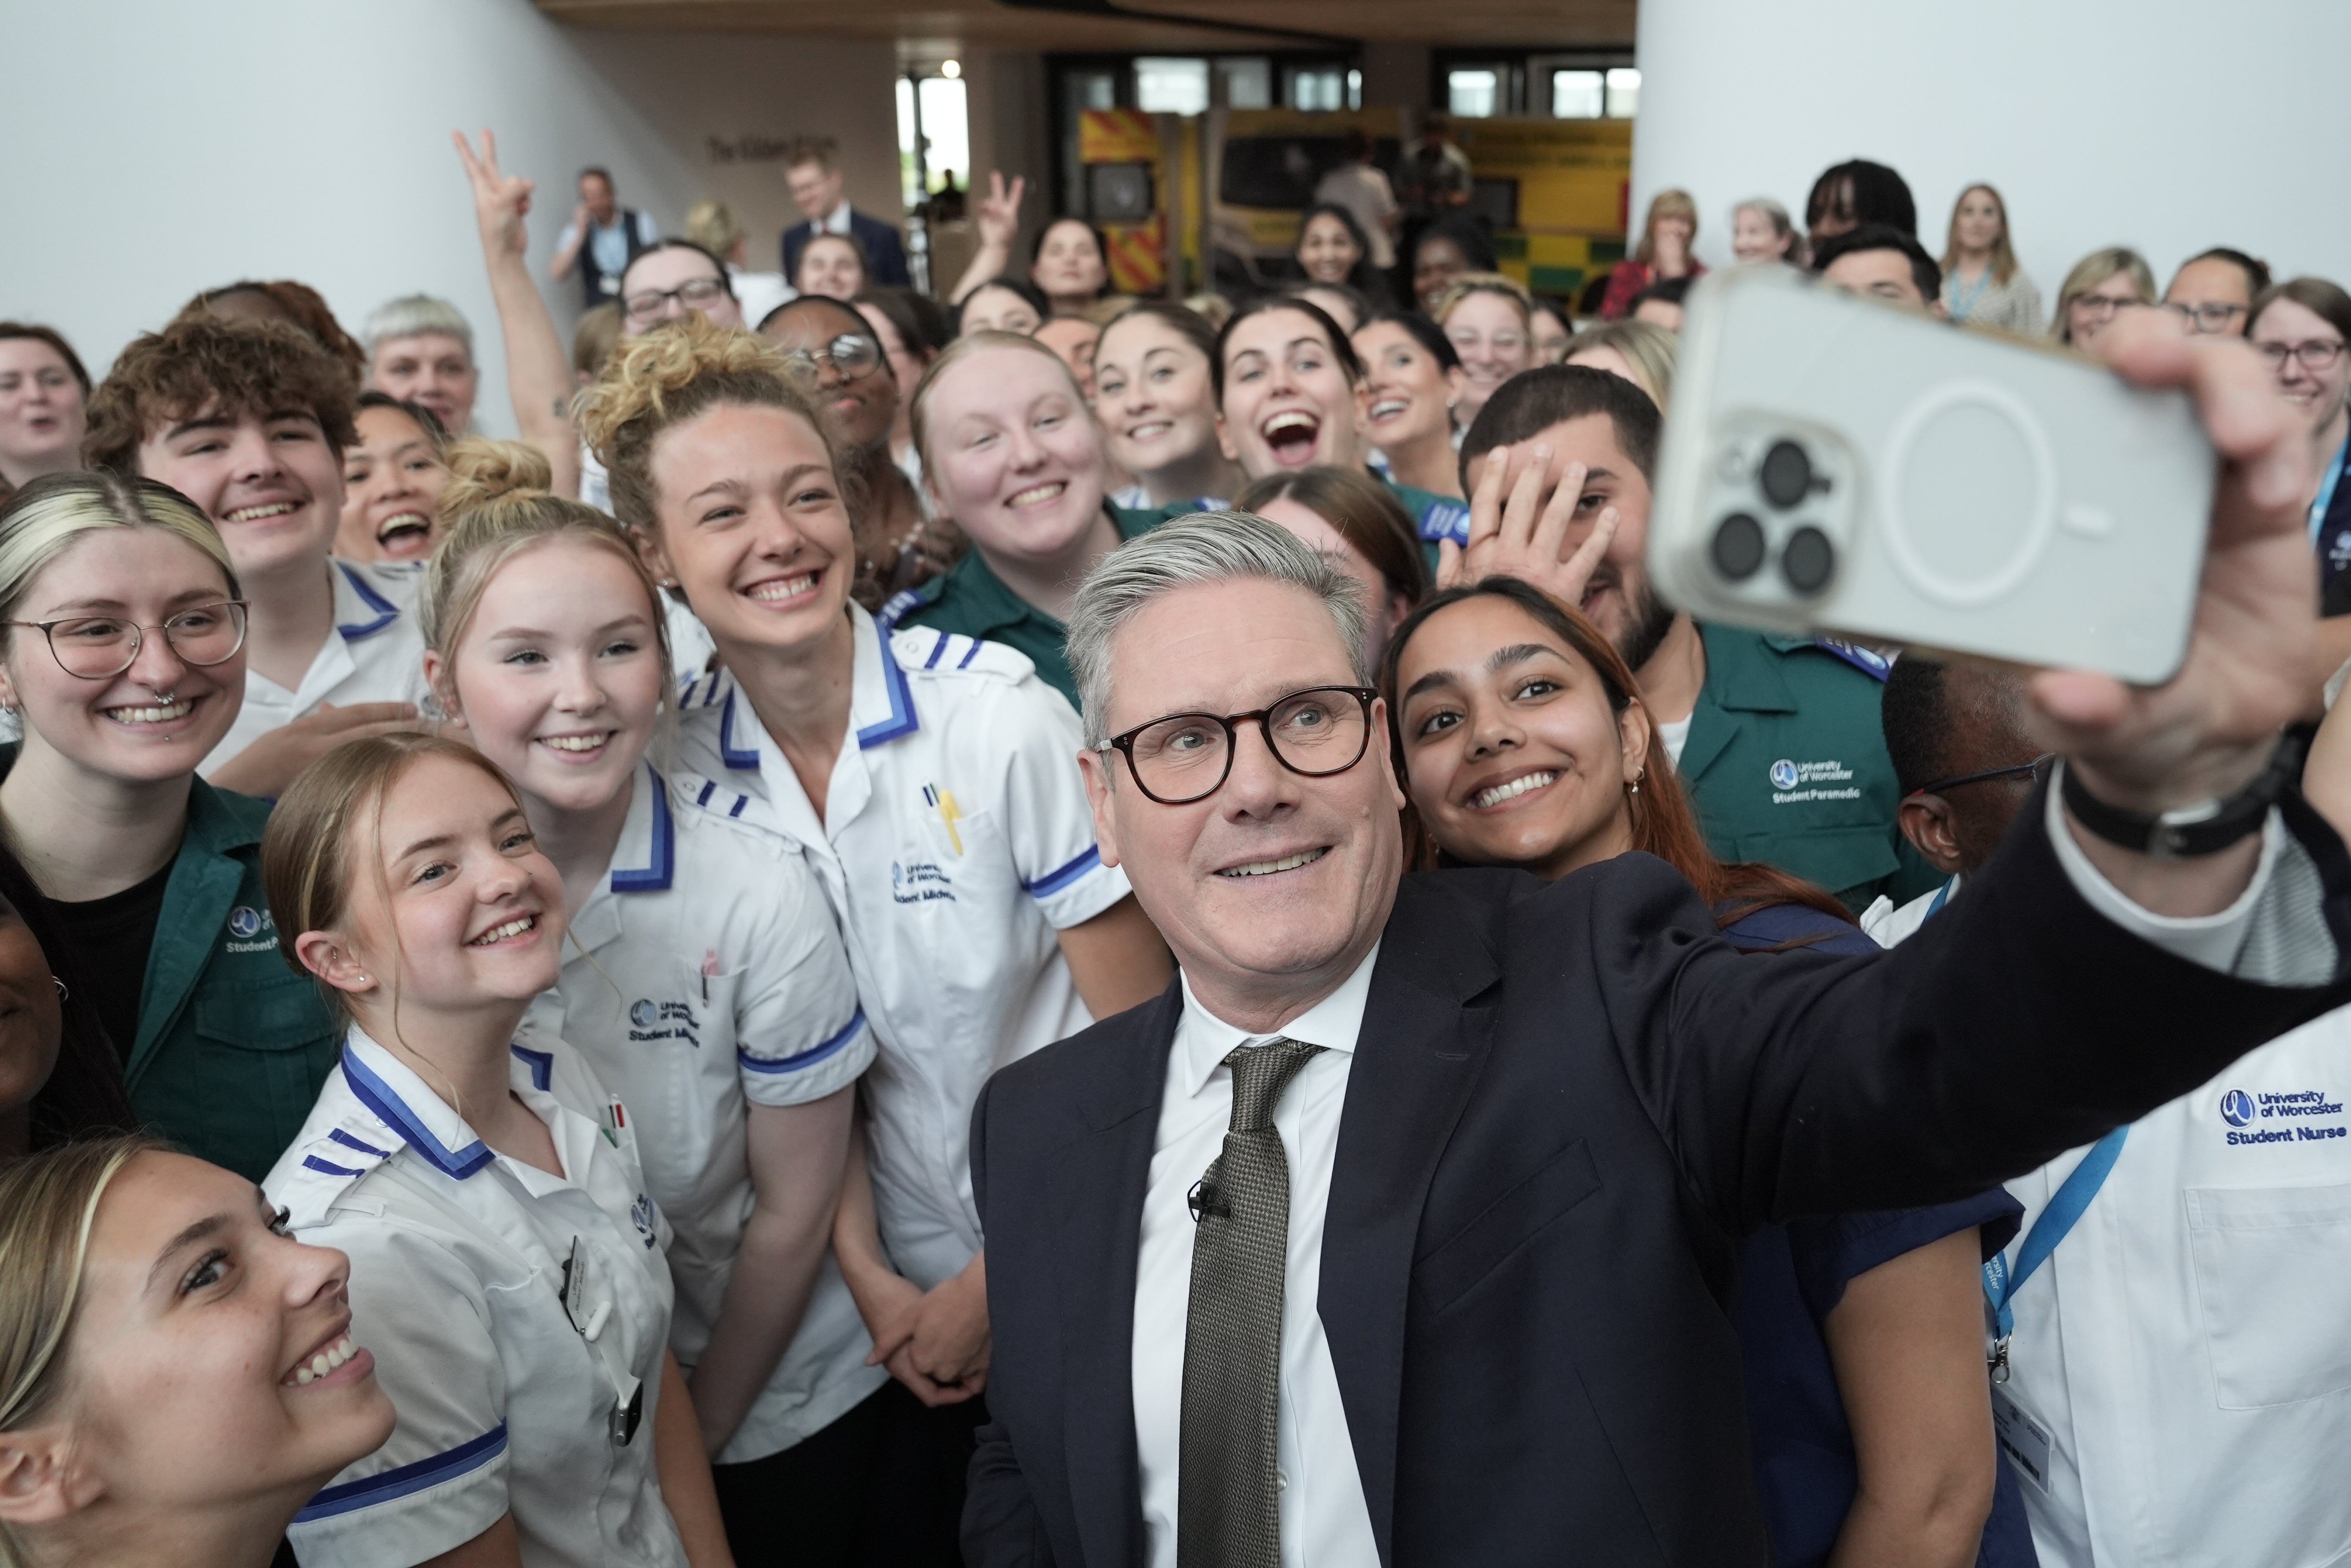 Starmer takes a selfie with student nurses and trainee medics following a Q&A session during a visit to Three Counties Medical School